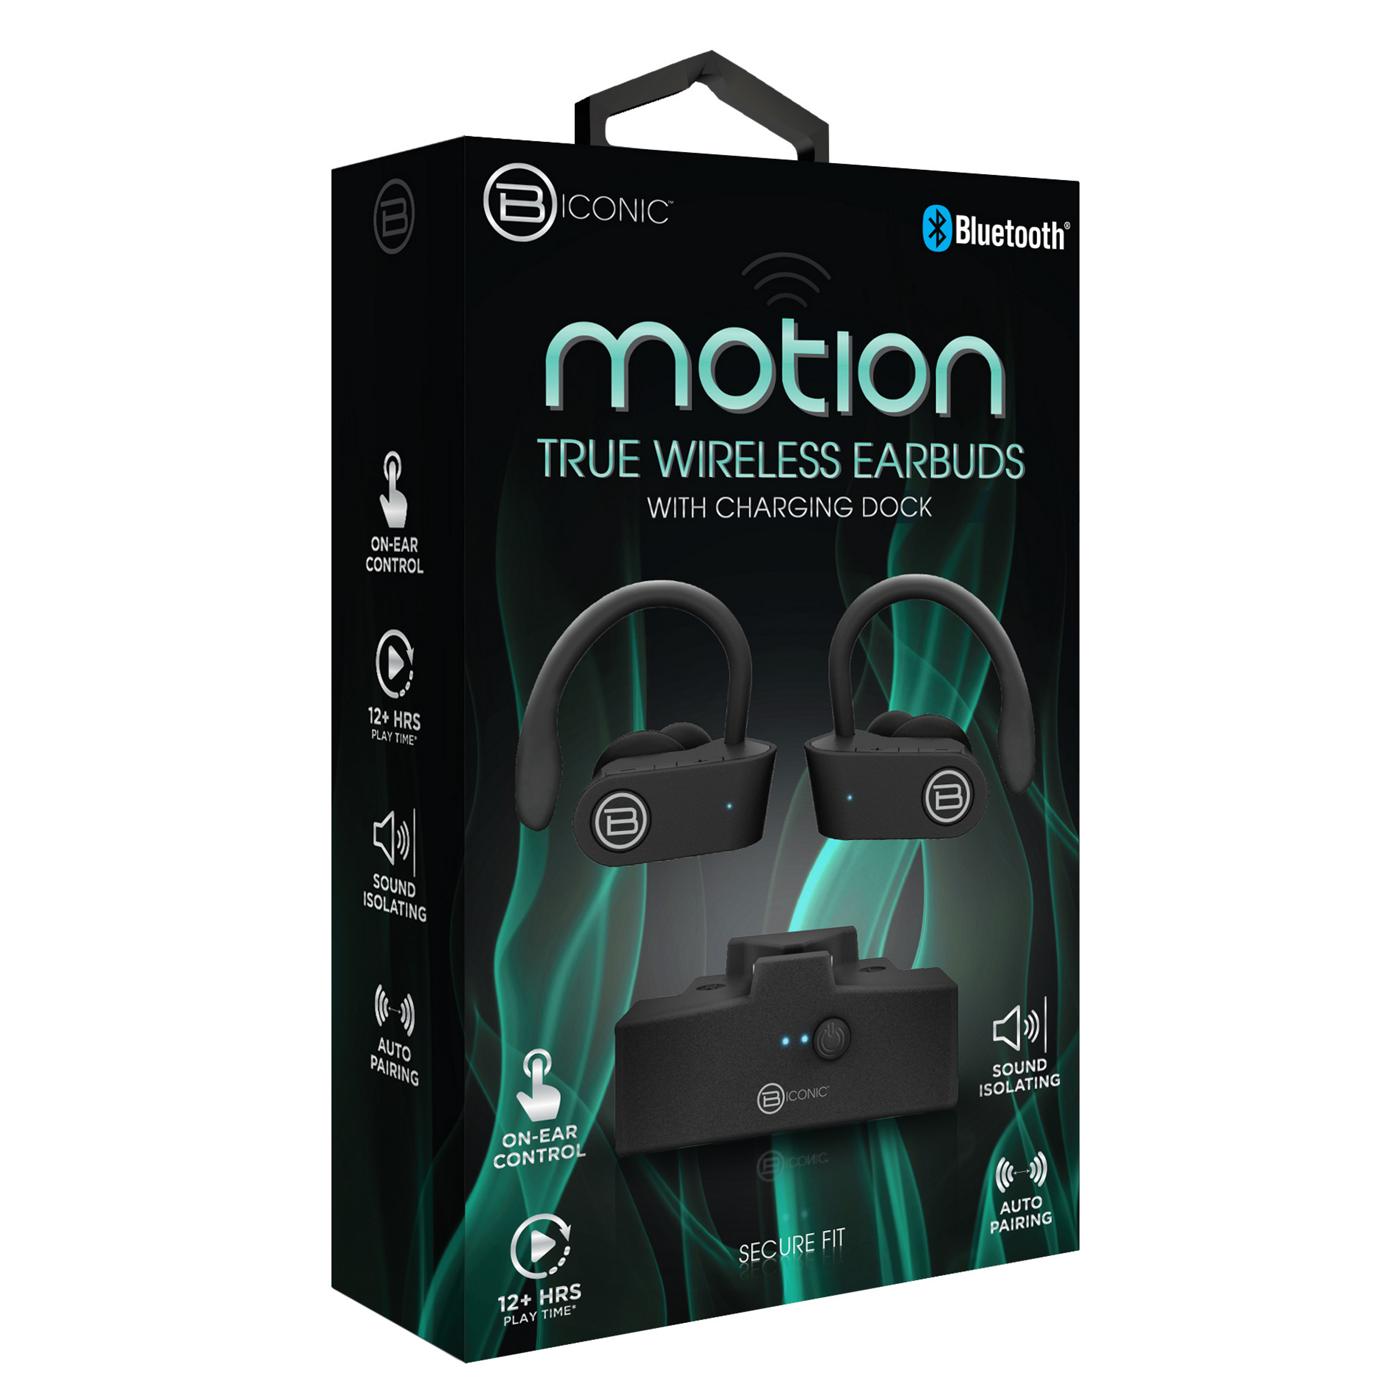 Biconic Motion True Wireless Black Earbuds with Charging Dock; image 2 of 2